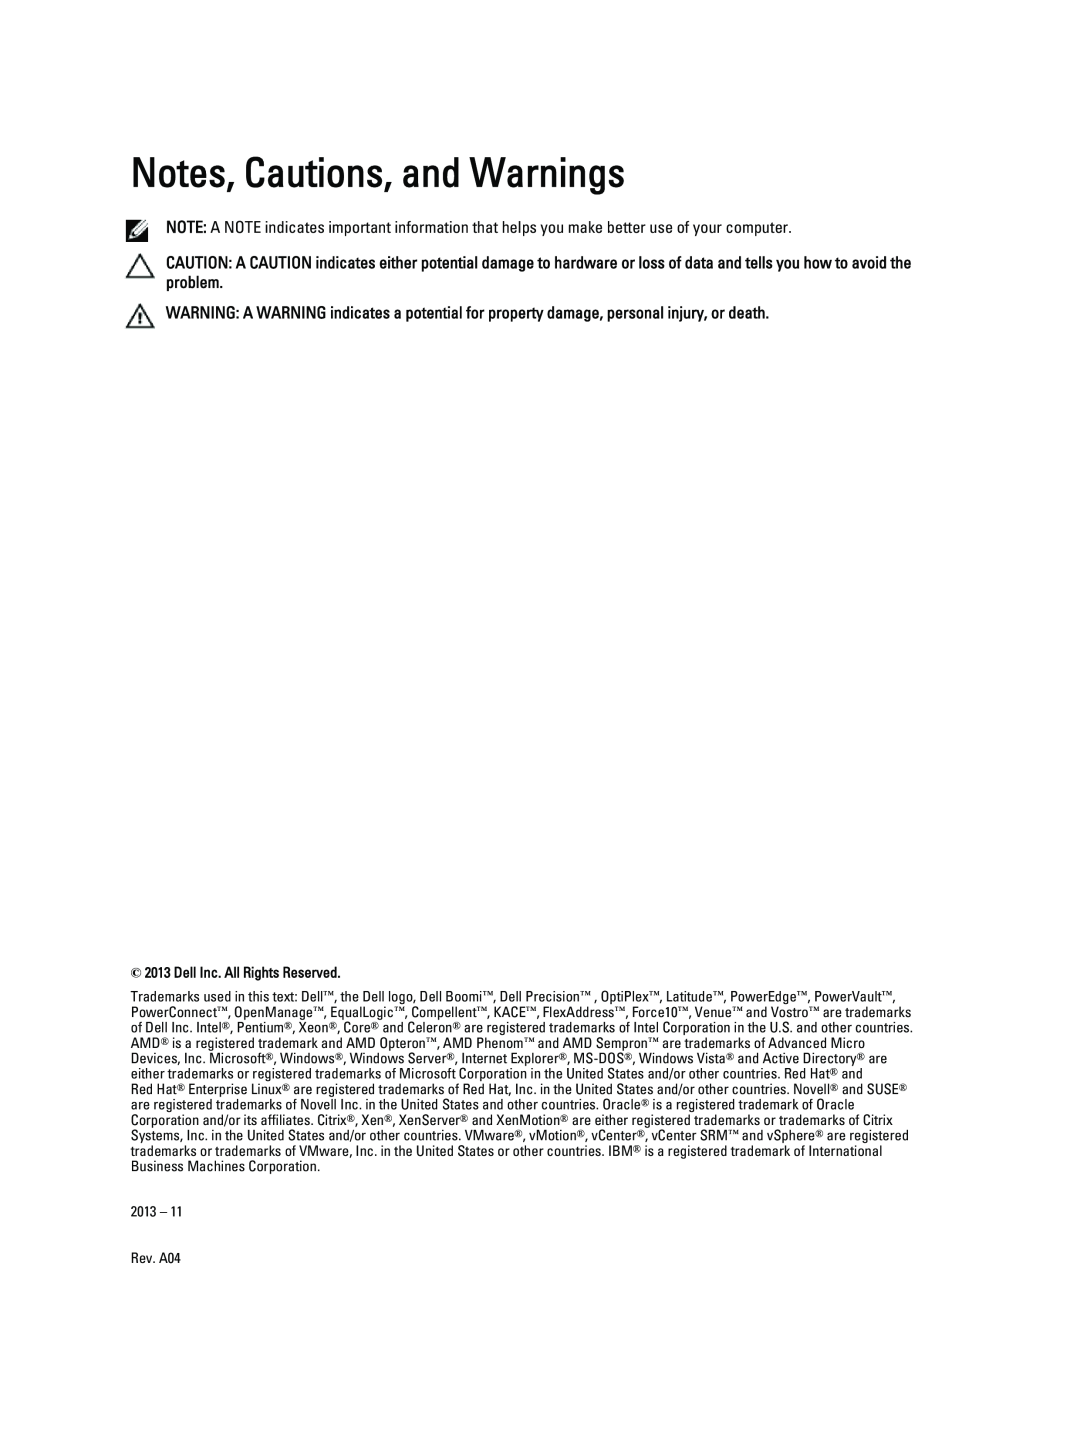 Dell R820 owner manual Notes, Cautions, and Warnings, Dell Inc. All Rights Reserved 